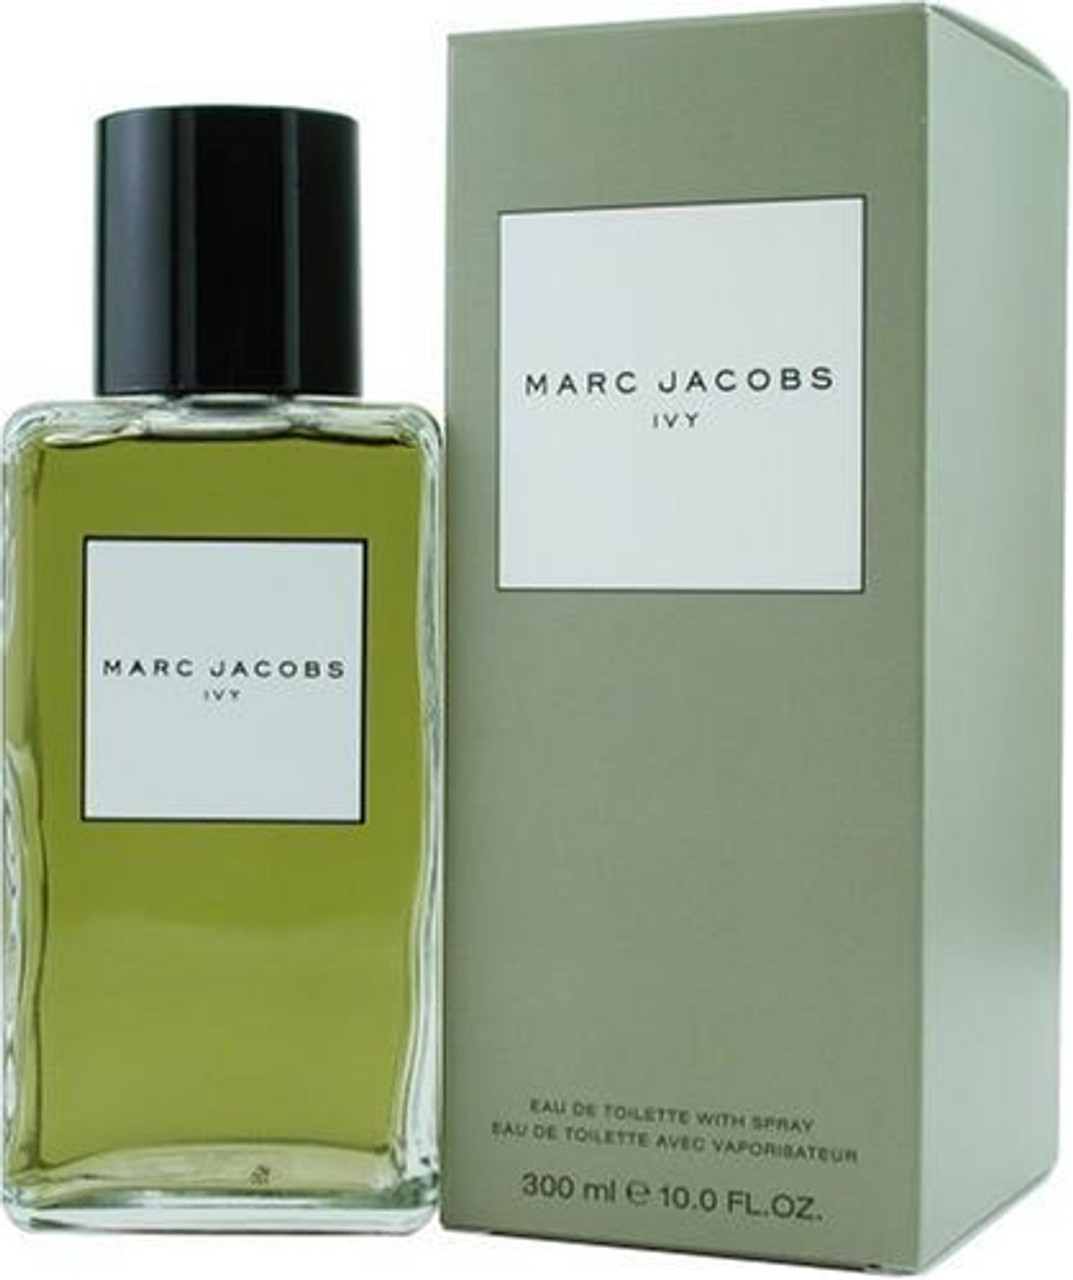 Marc Jacobs Ivy by Marc Jacobs - Buy online